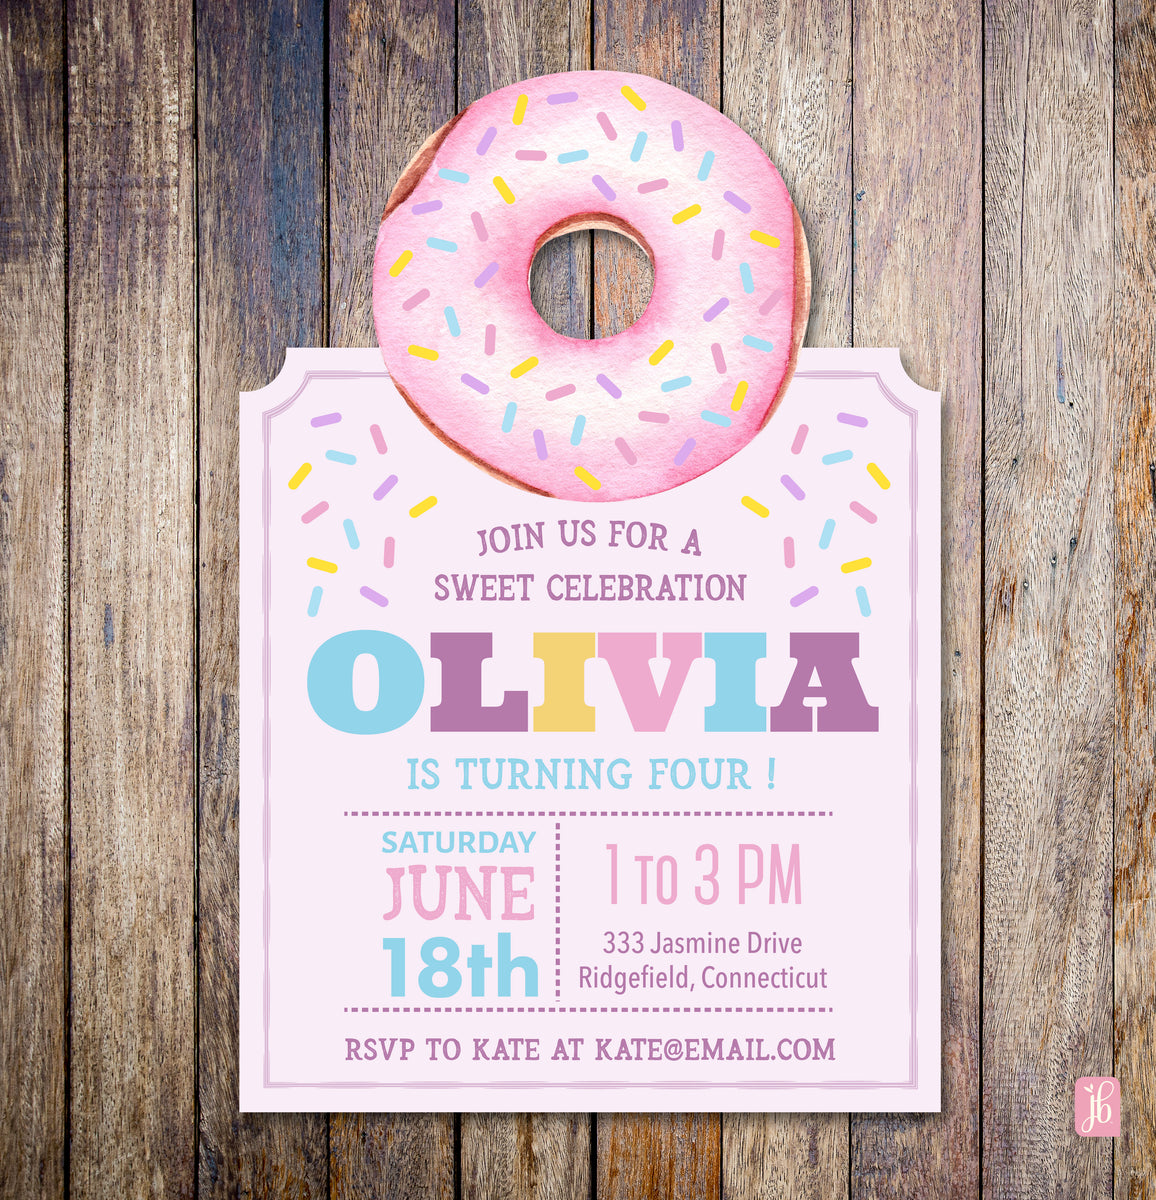 Pin on invitations and goodies